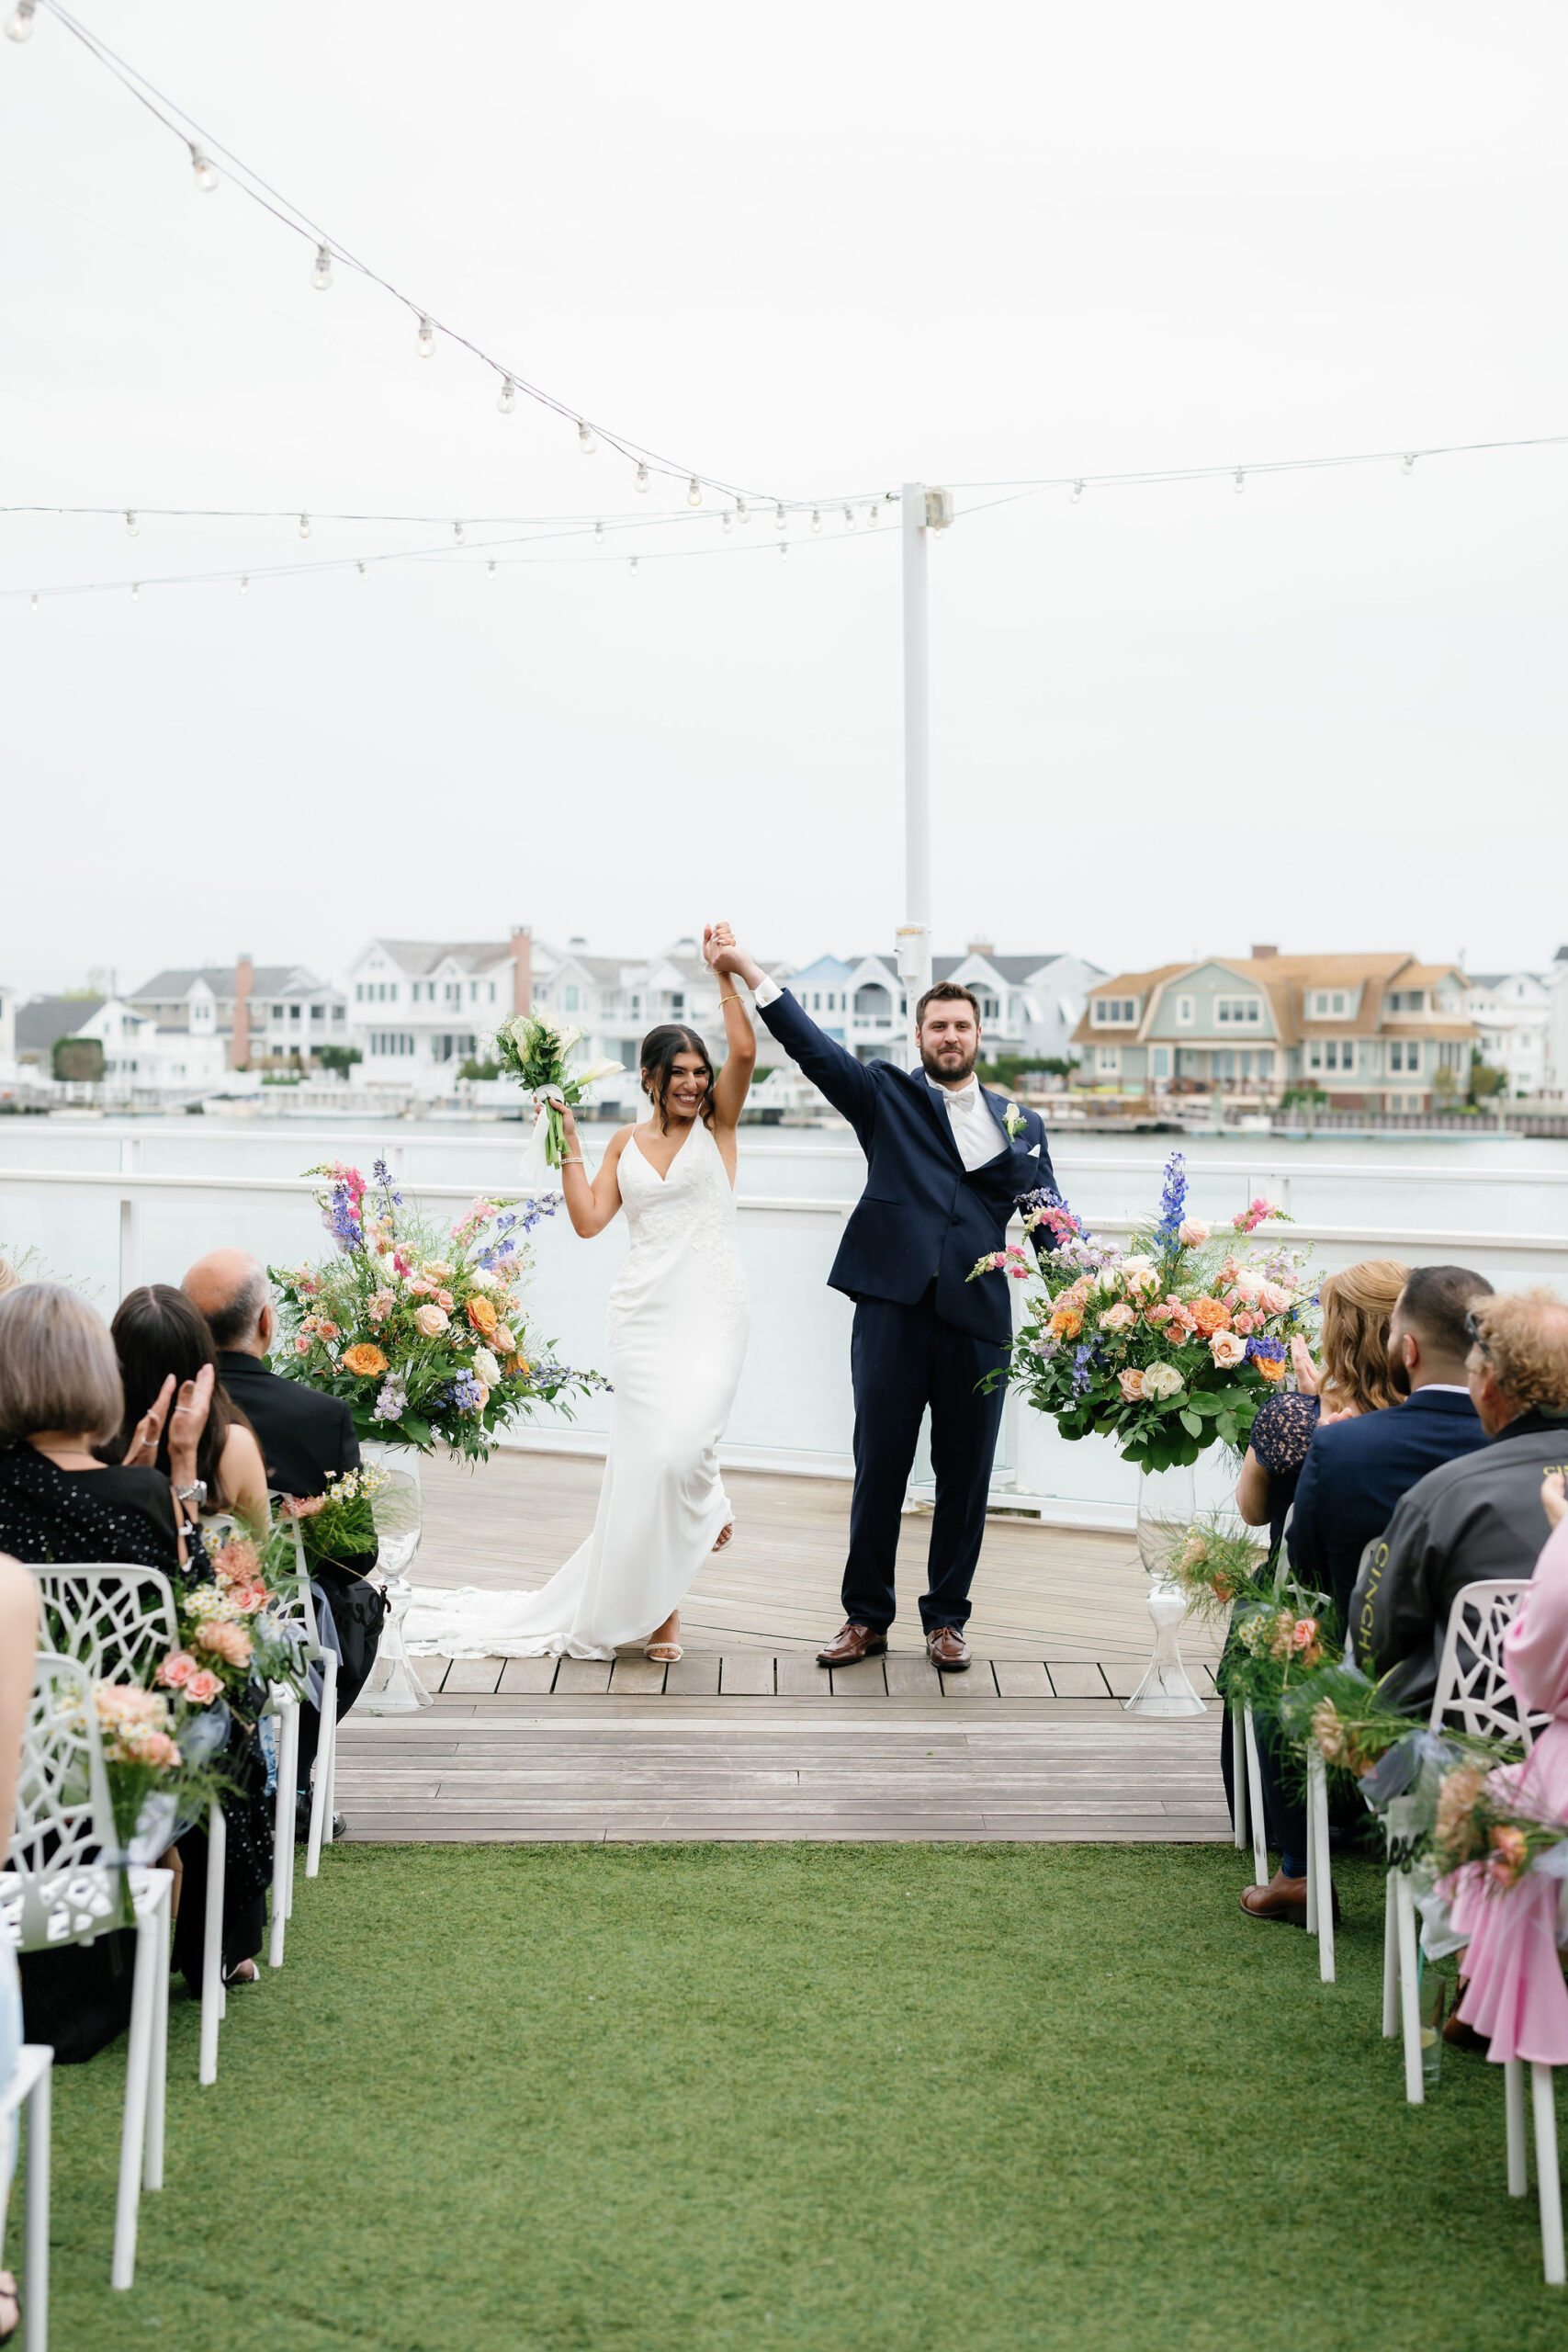 wedding ceremony at the Reeds by Lisa Blanche Photography